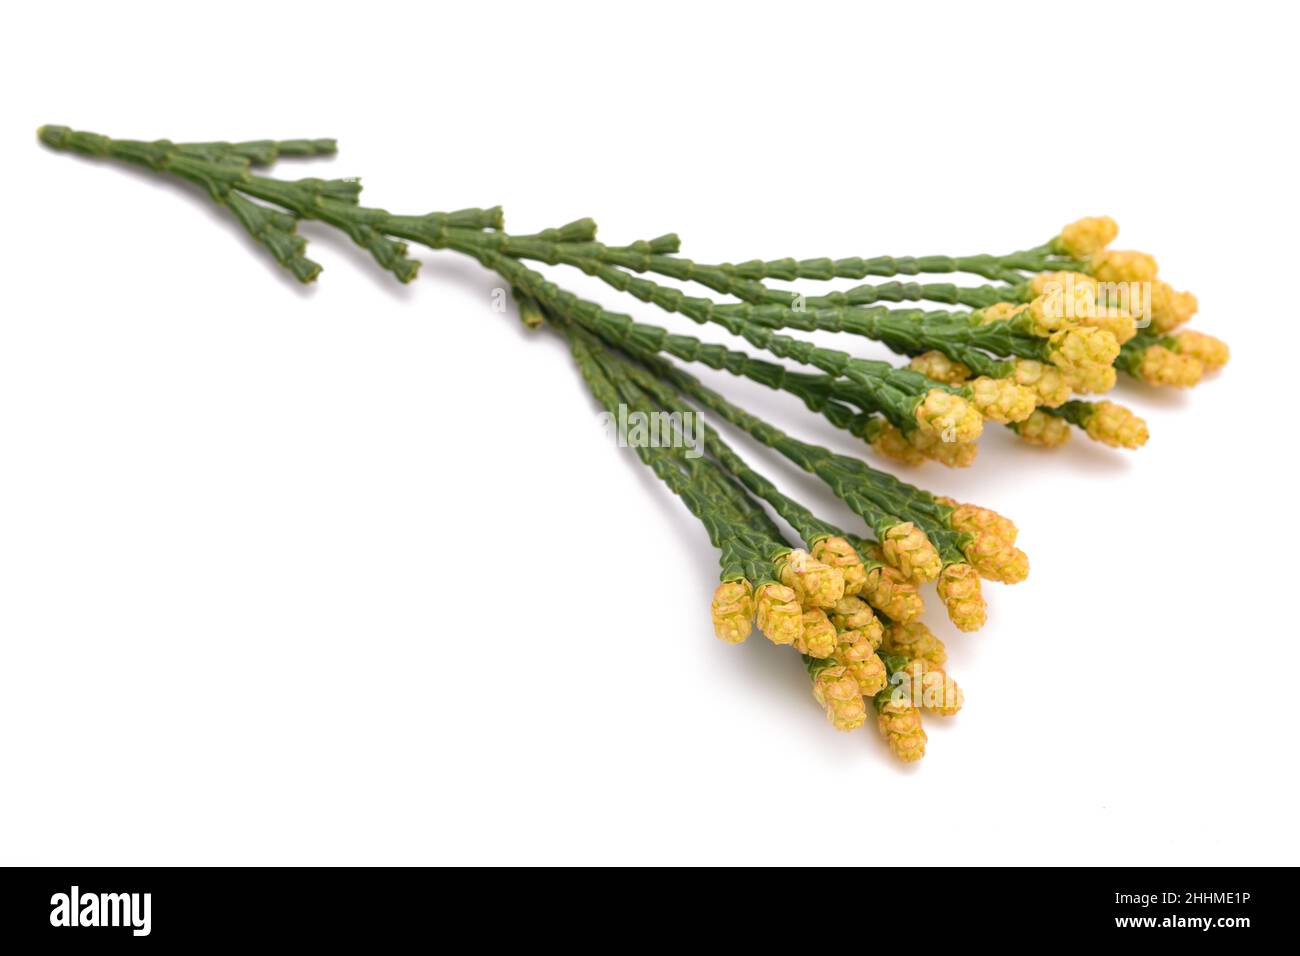 California incense cedar branch (Calocedrus decurrens) isolated on white Stock Photo